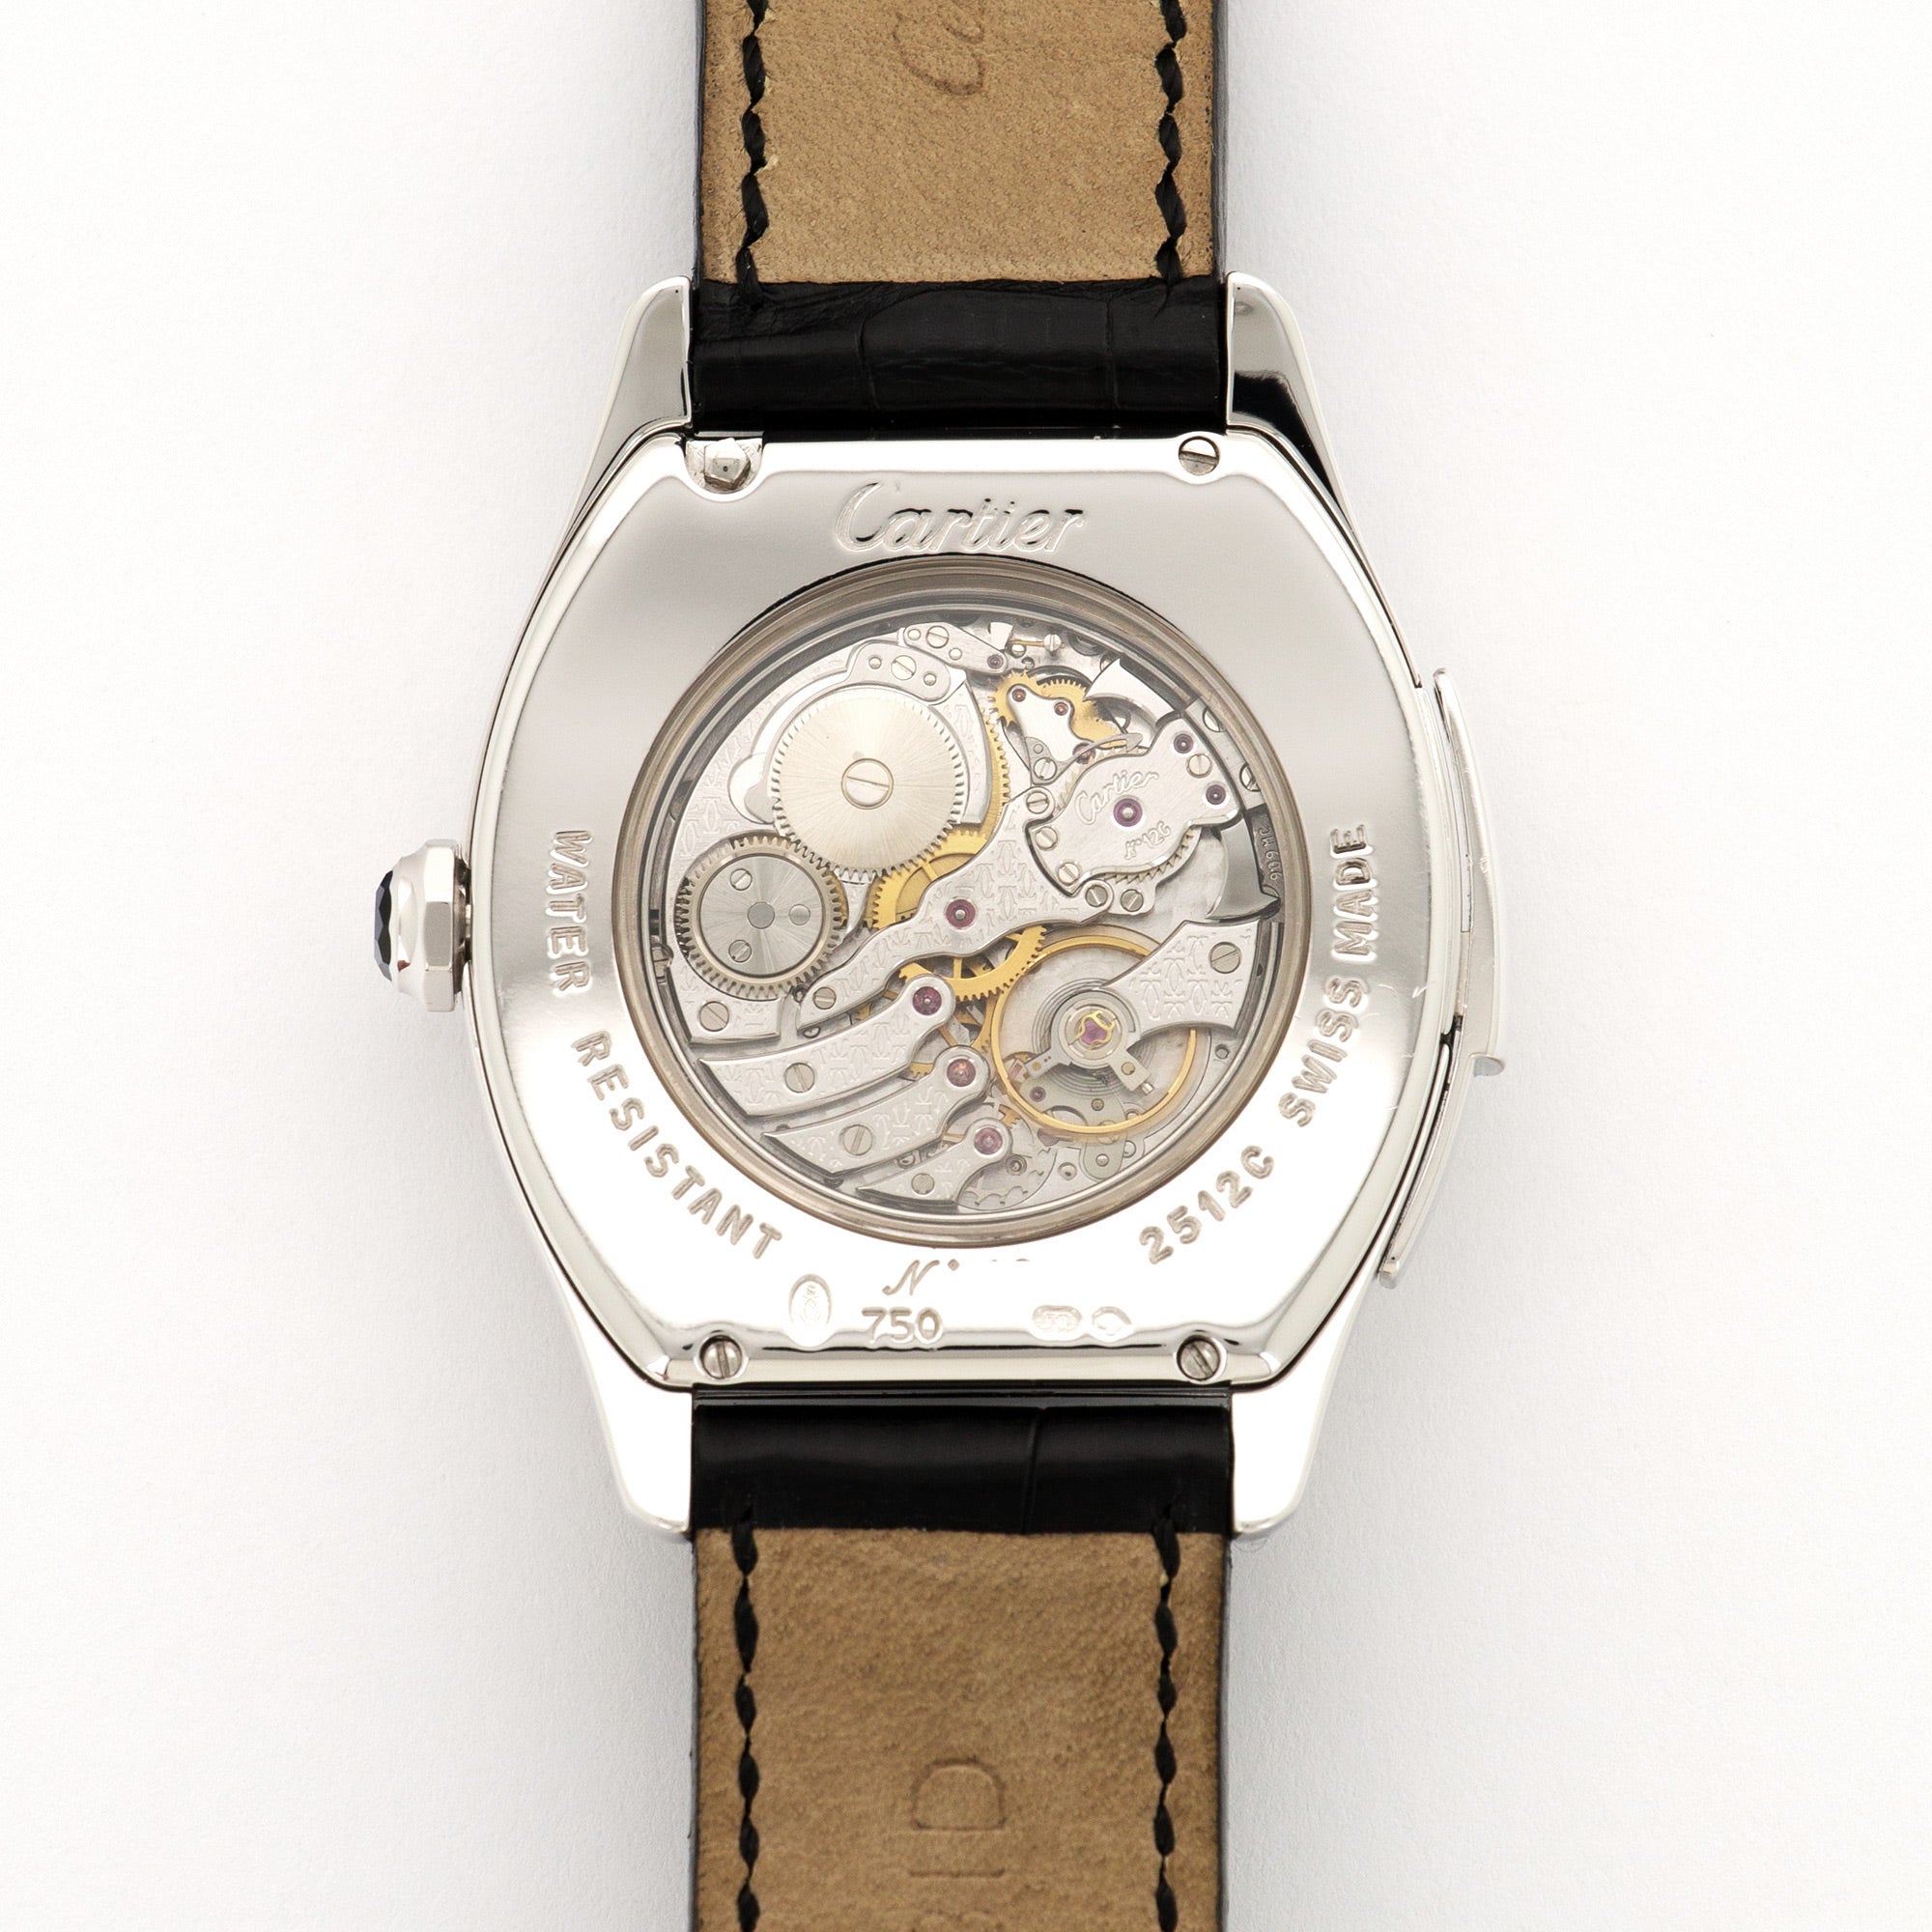 Cartier - Cartier White Gold Tortue Minute Repeater Watch - The Keystone Watches